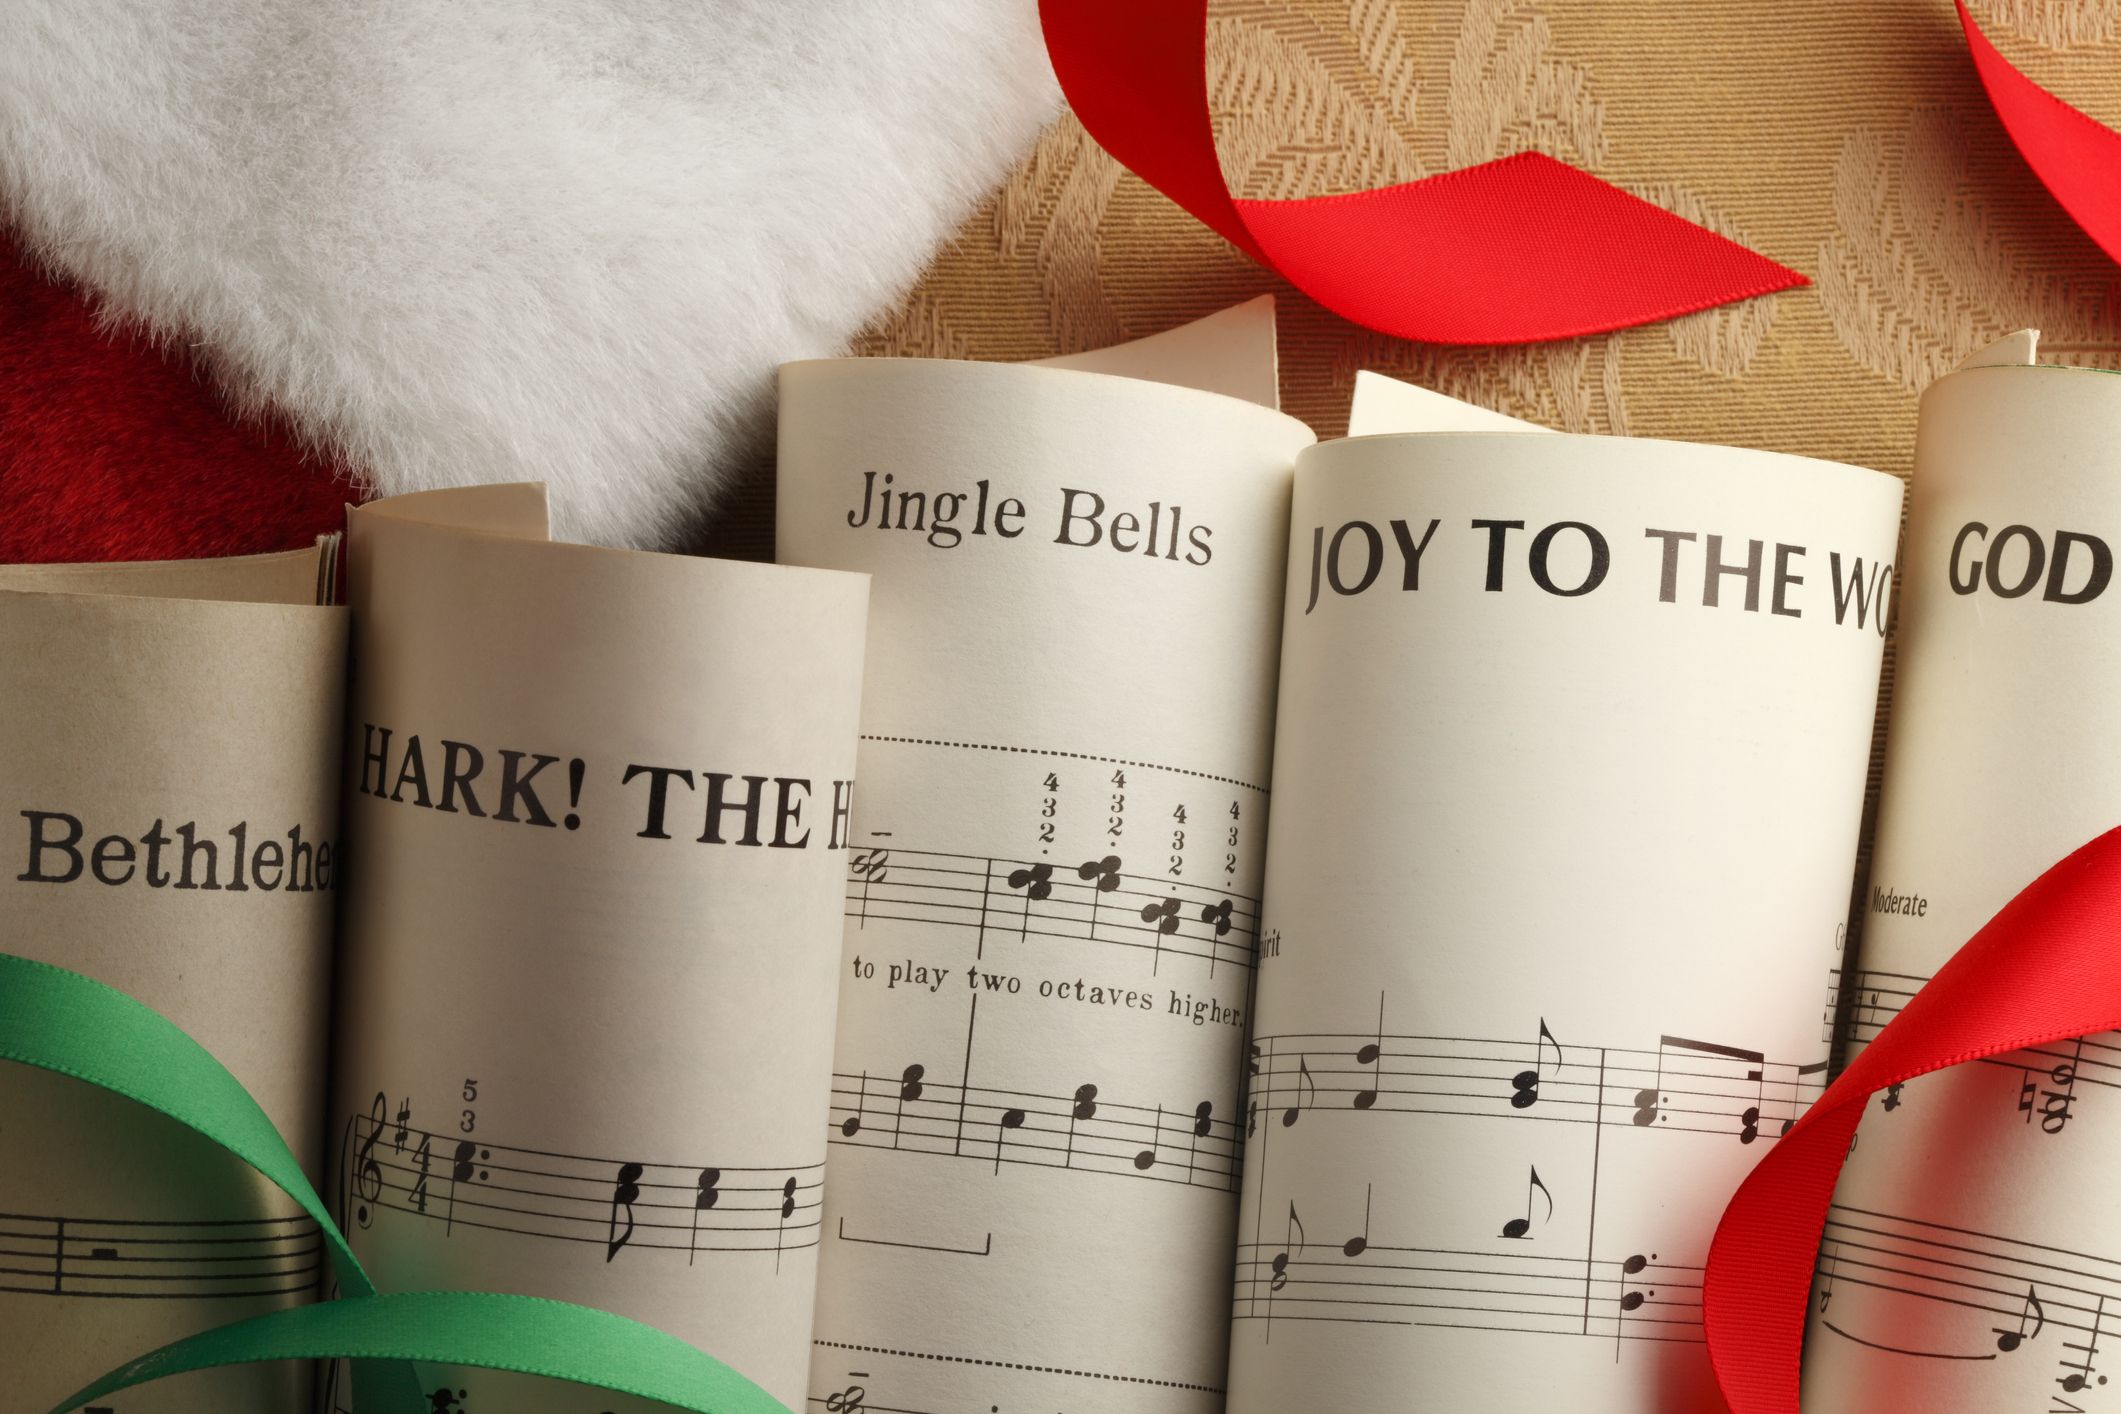 25 Best Religious Christmas Songs and Hymns to Spread Holiday Joy